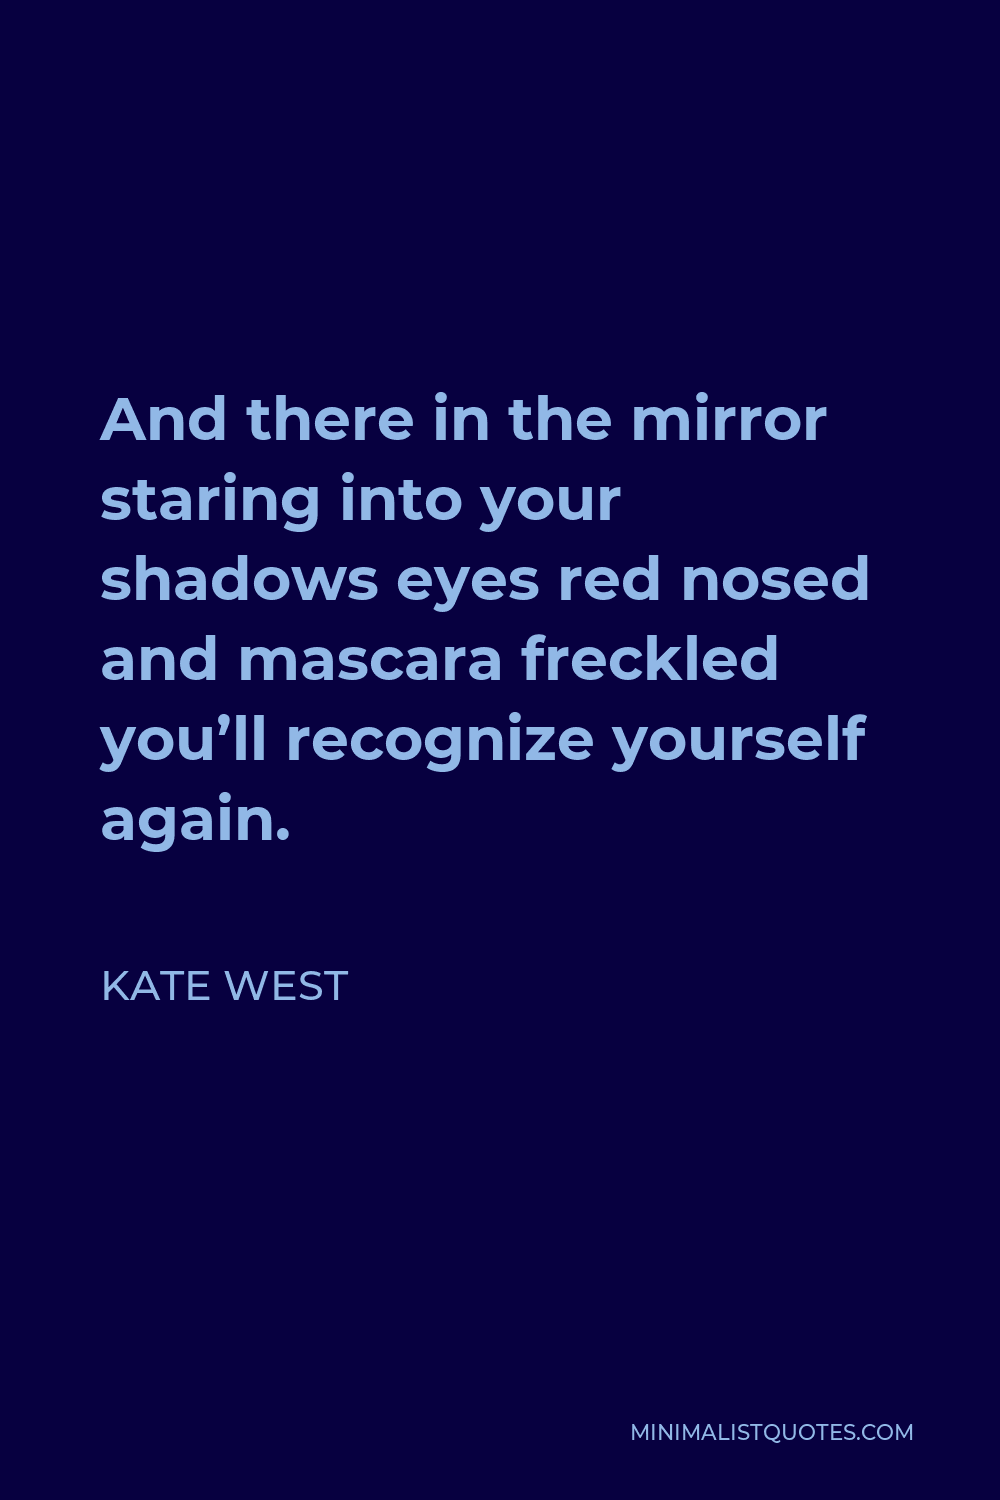 Kate West Quote - And there in the mirror staring into your shadows eyes red nosed and mascara freckled you’ll recognize yourself again.